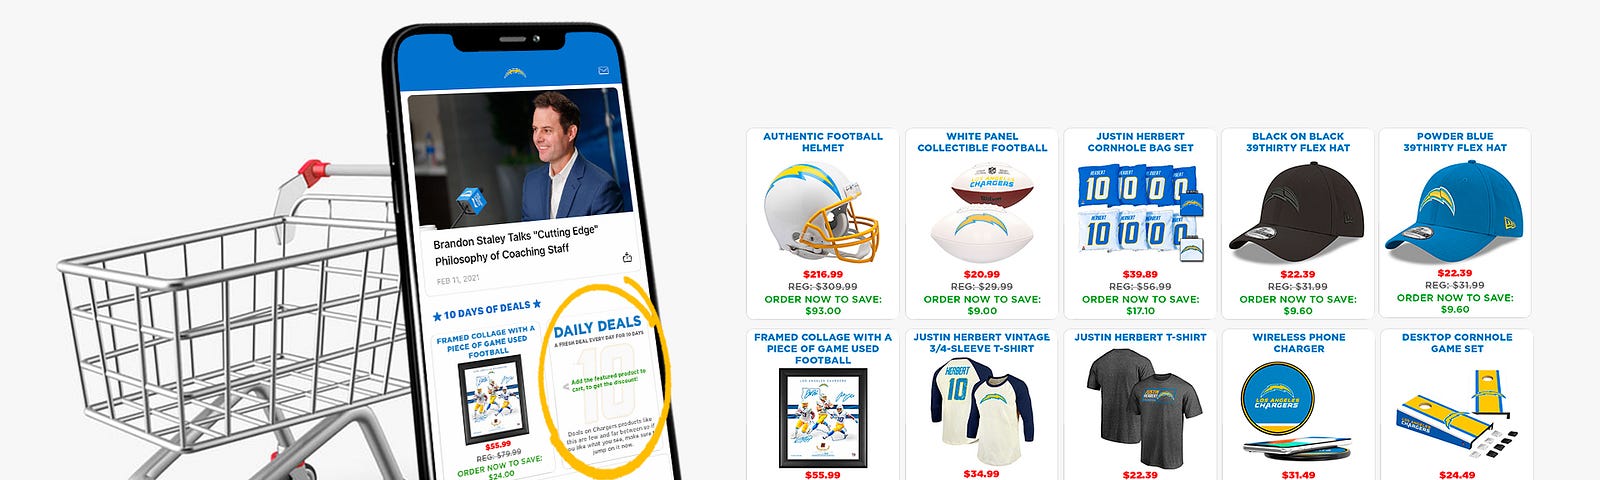 10 Days of Daily Deals, available through YinzCam’s Los Angeles Chargers app.